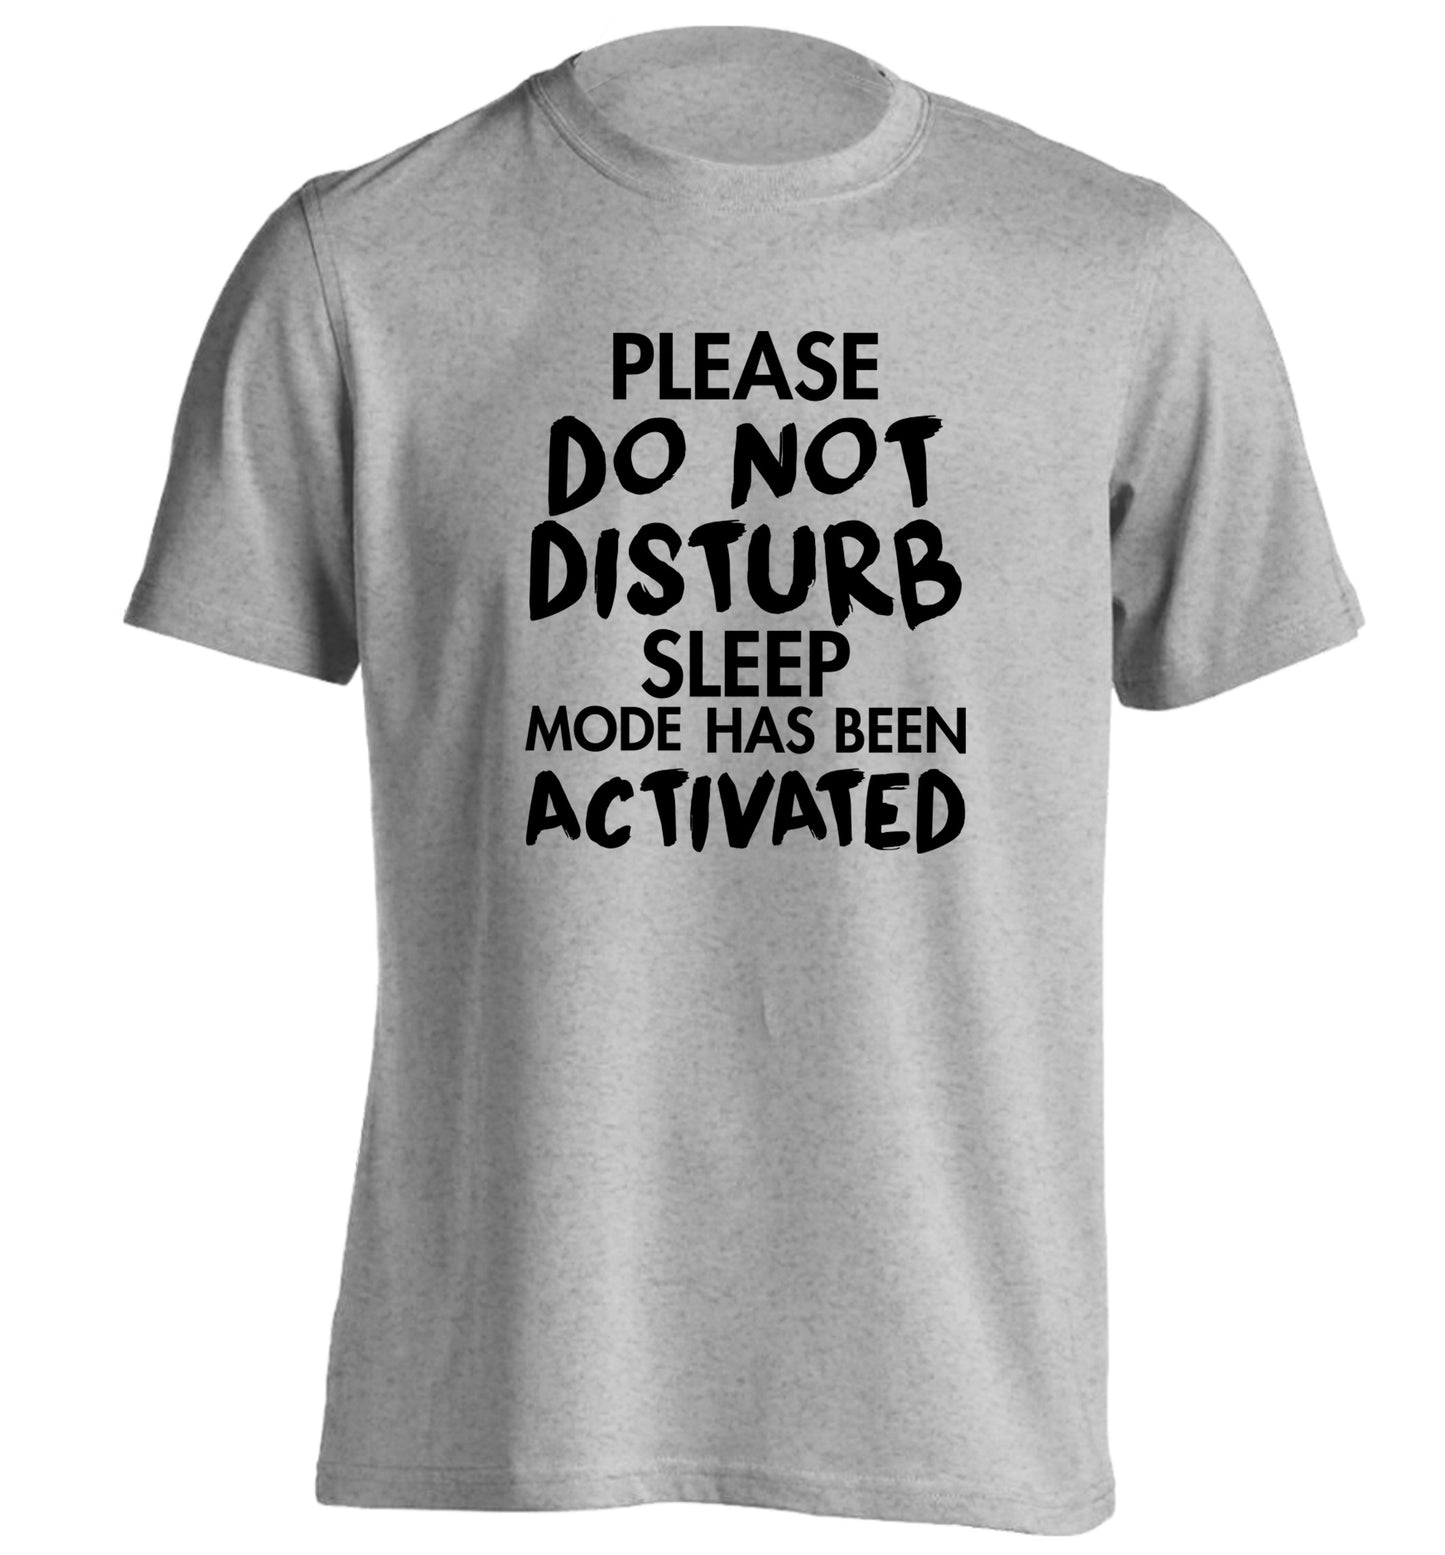 Please do not disturb sleeping mode has been activated adults unisex grey Tshirt 2XL